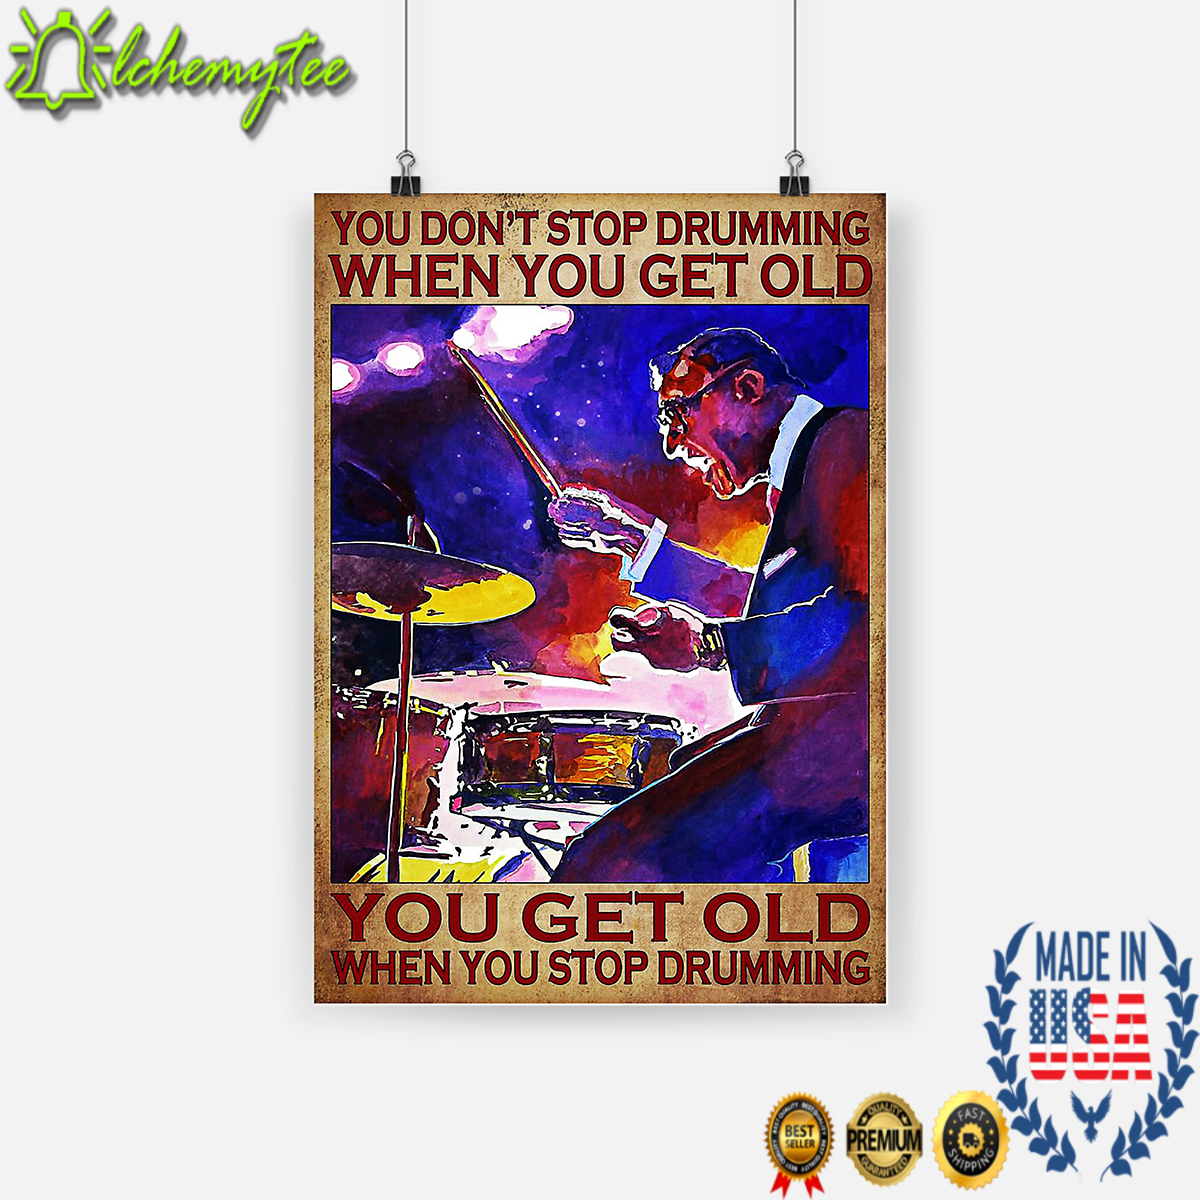 You don’t stop drumming when you get old poster